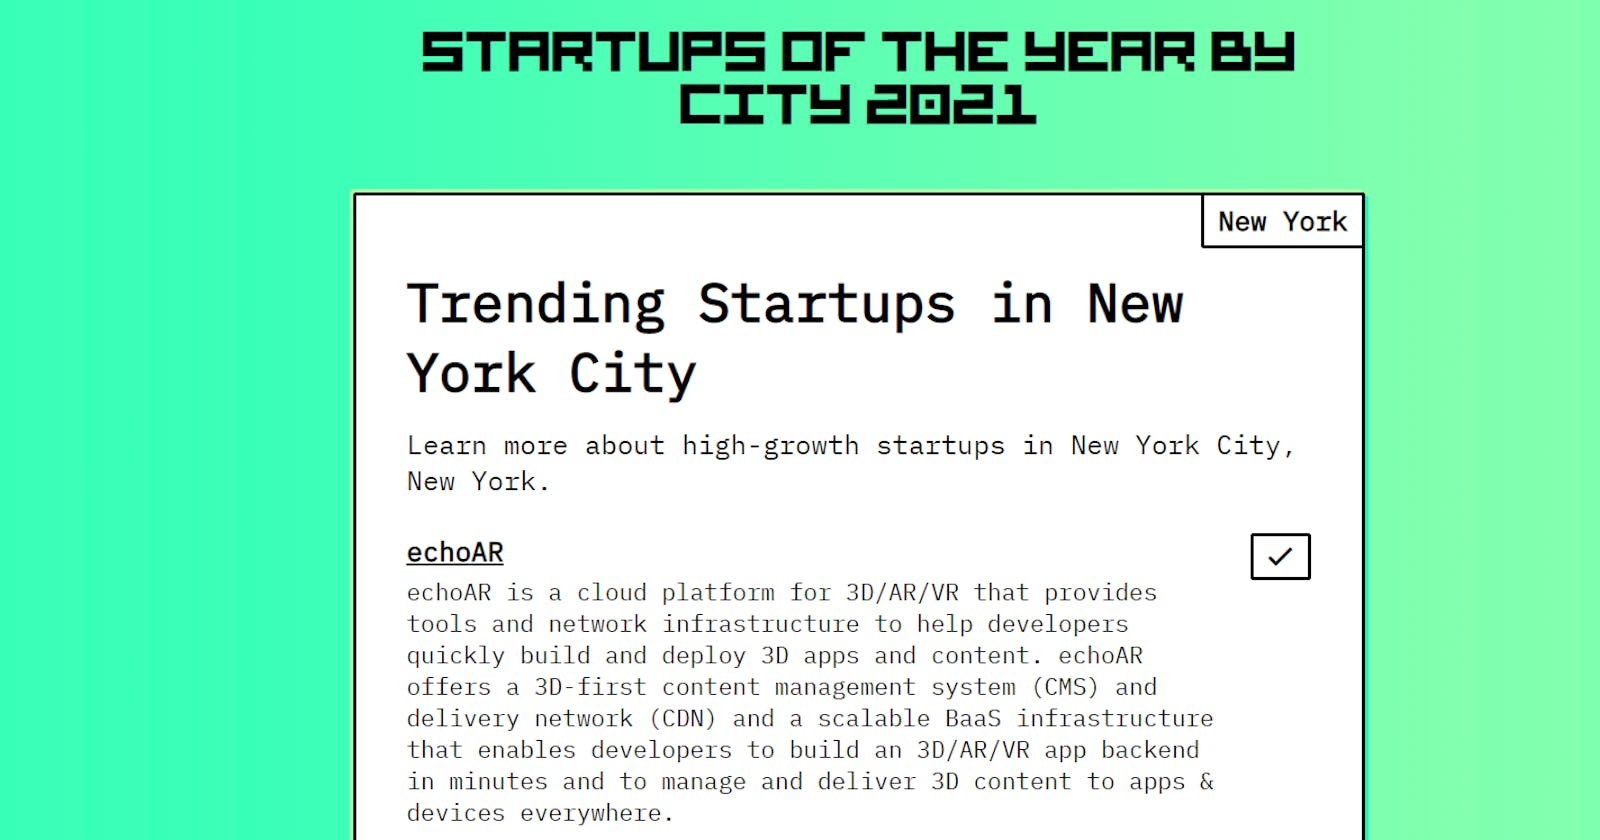 echoAR nominated "one of the best startups in NYC" - VOTE NOW!